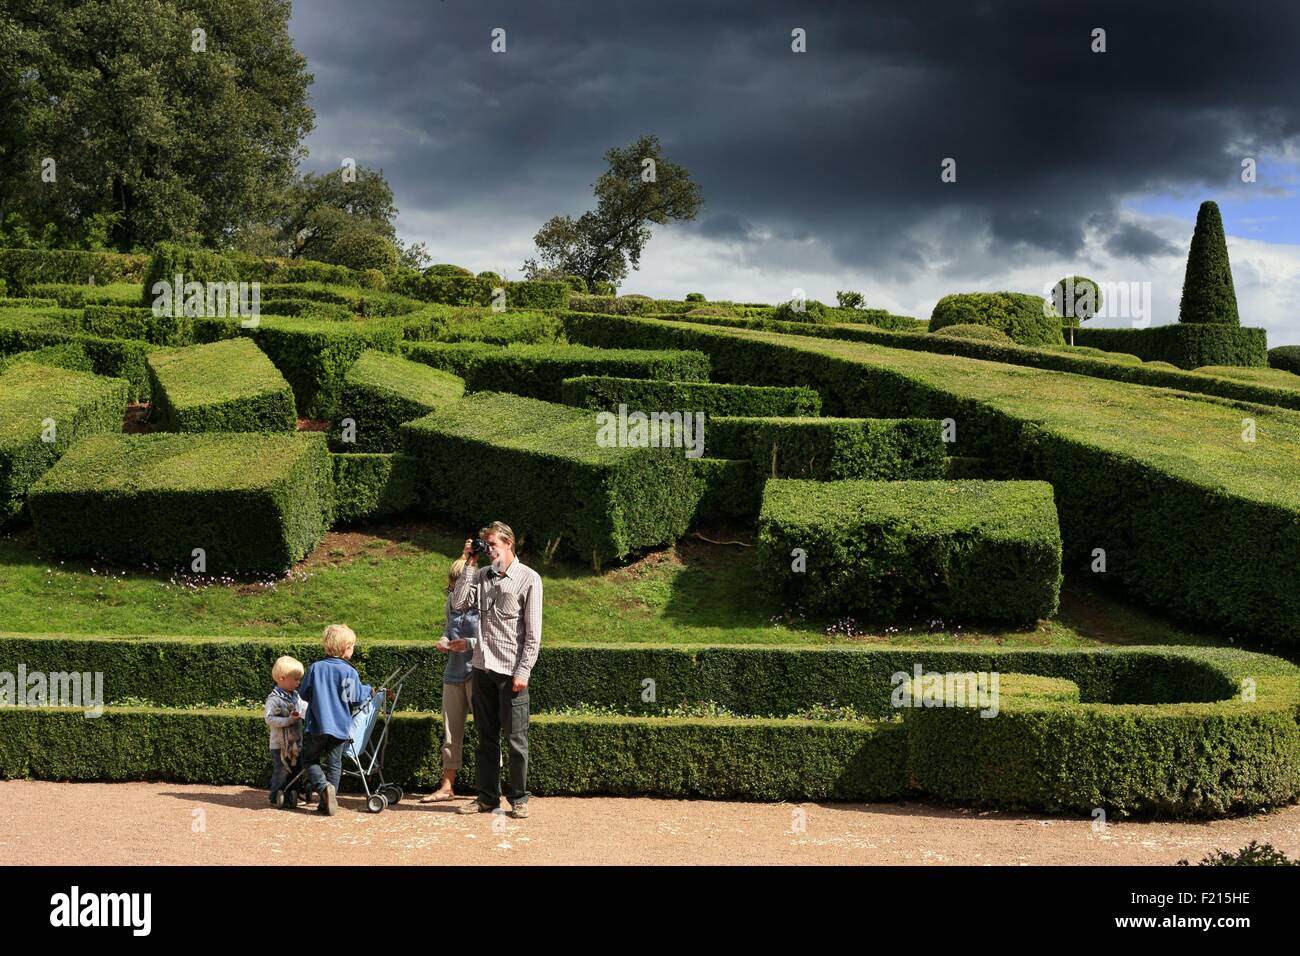 France, Dordogne, Perigord, Vezac, Marqueyssac castle, Family of tourists visiting the gardens of a castle under a stormy sky Stock Photo